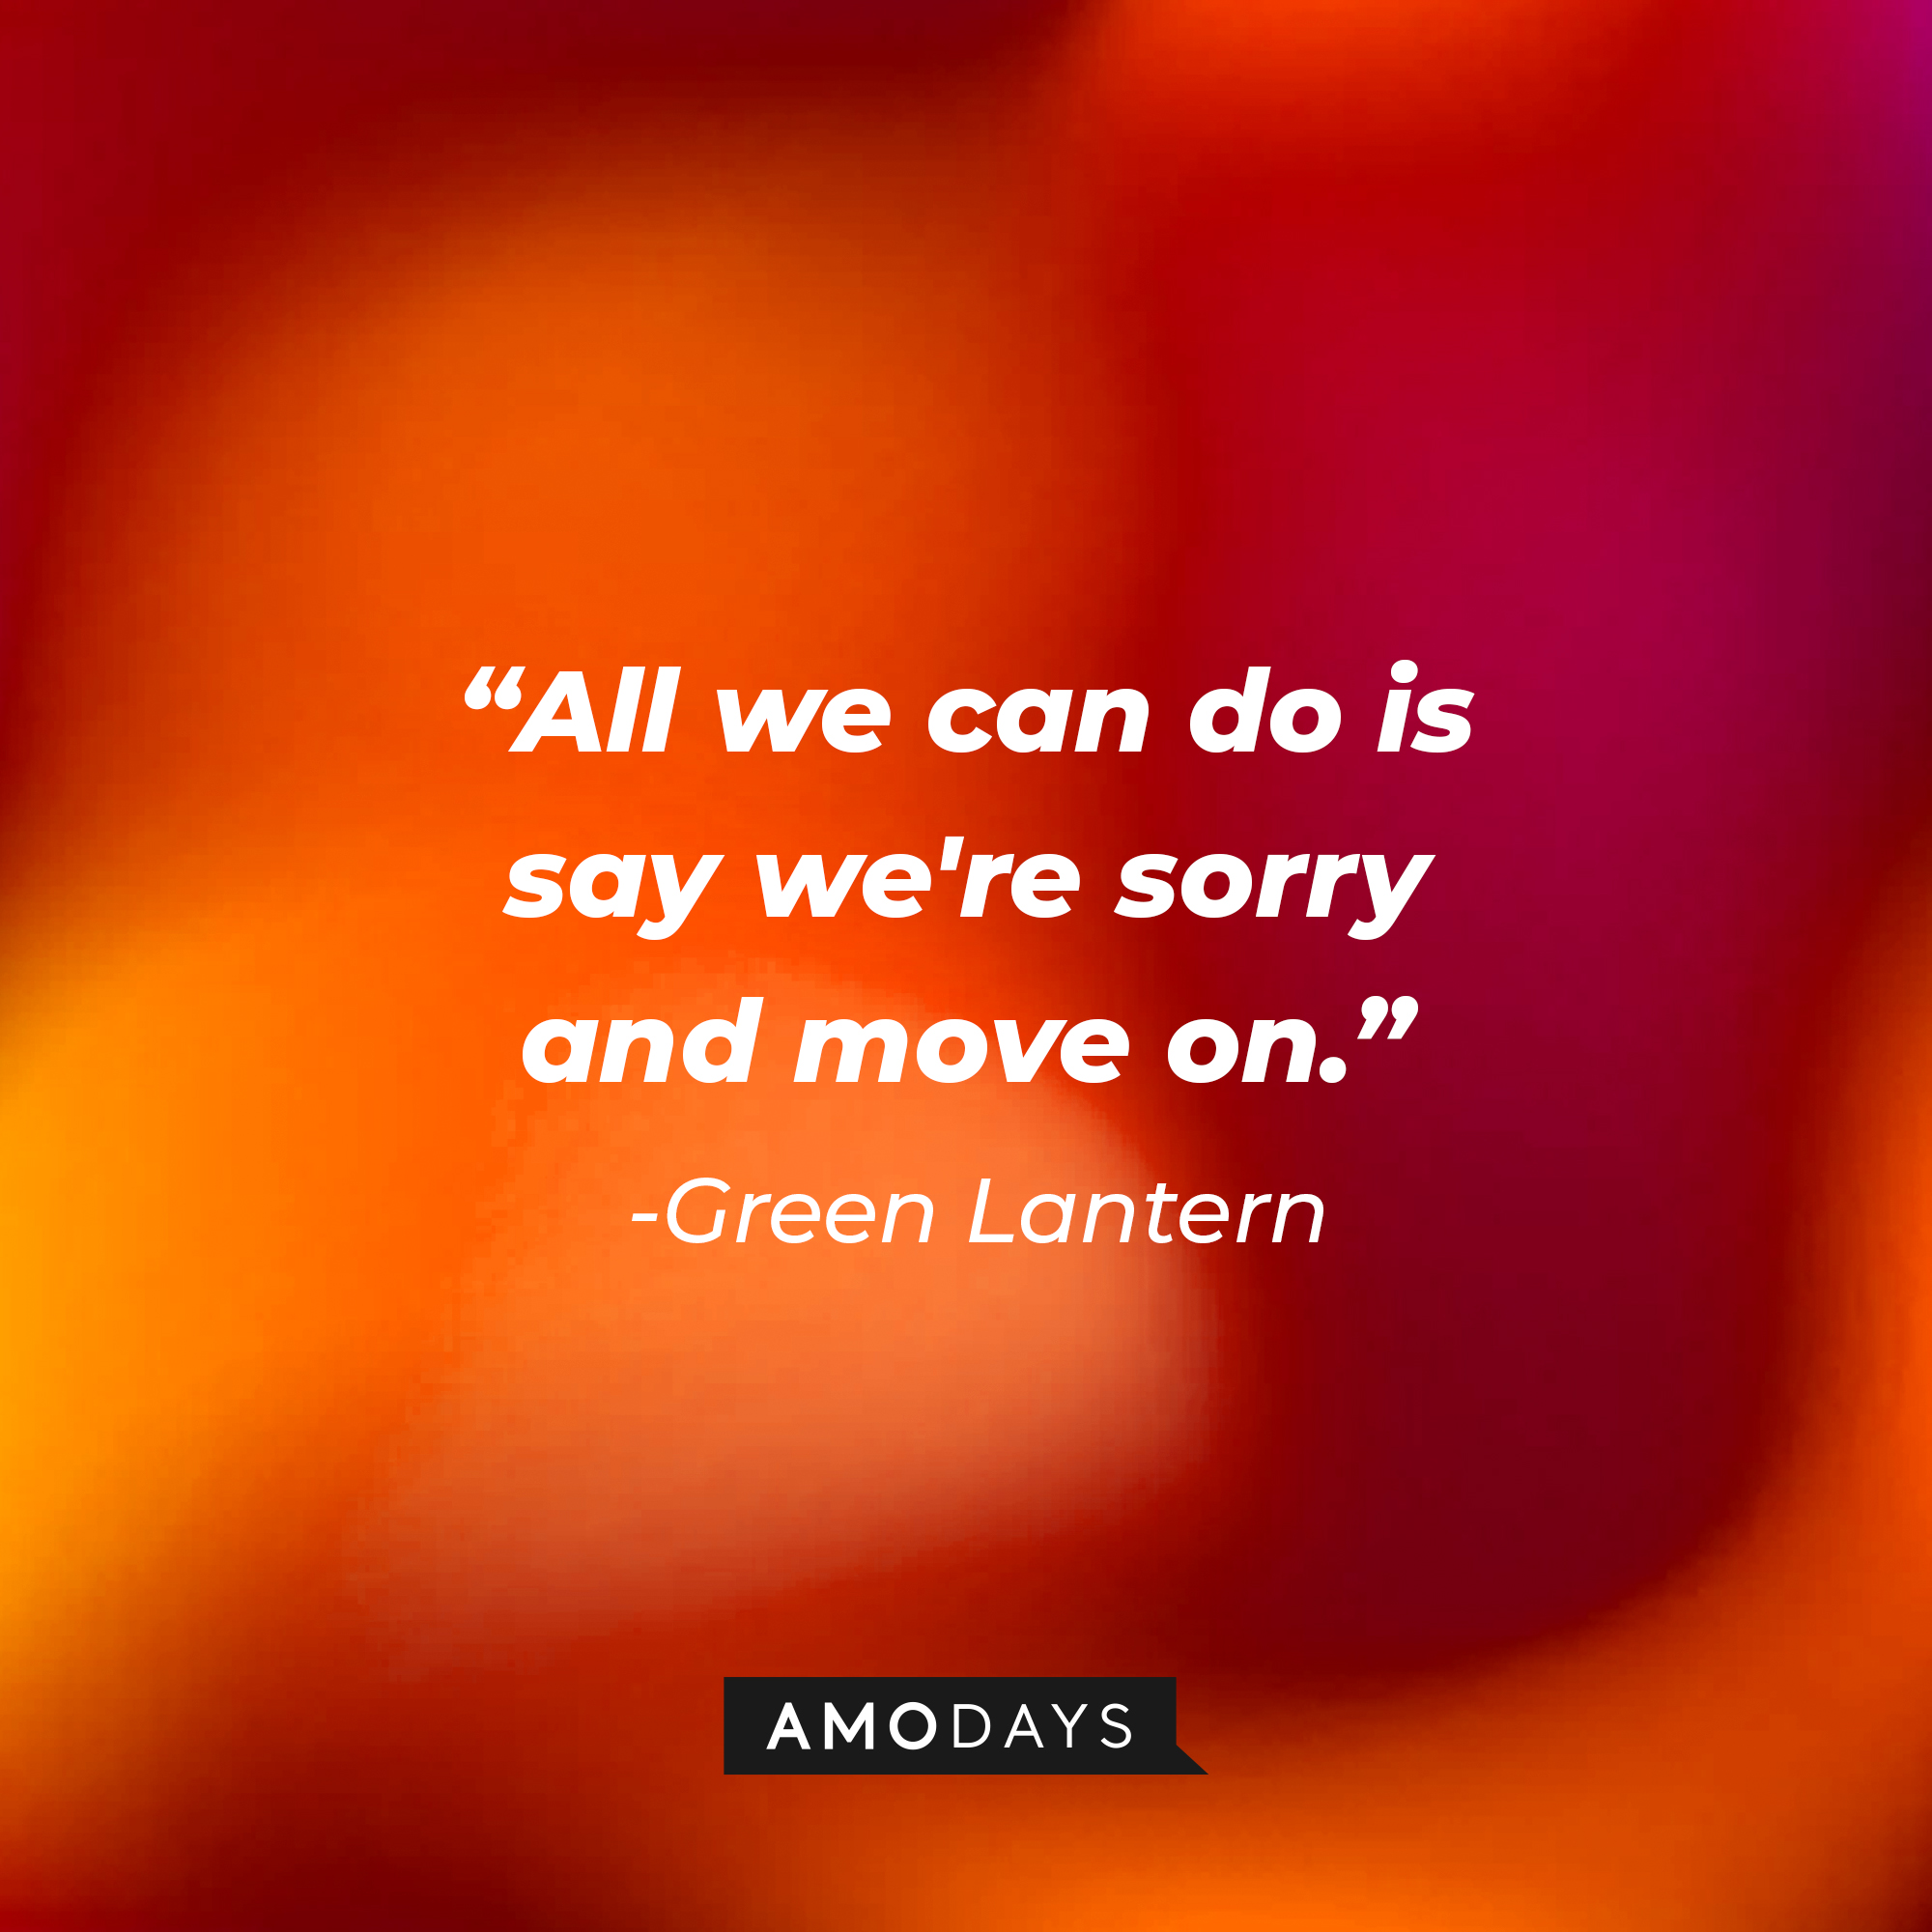 Green Lantern's quote: All we can do is say we're sorry and move on." | Source: AmoDays